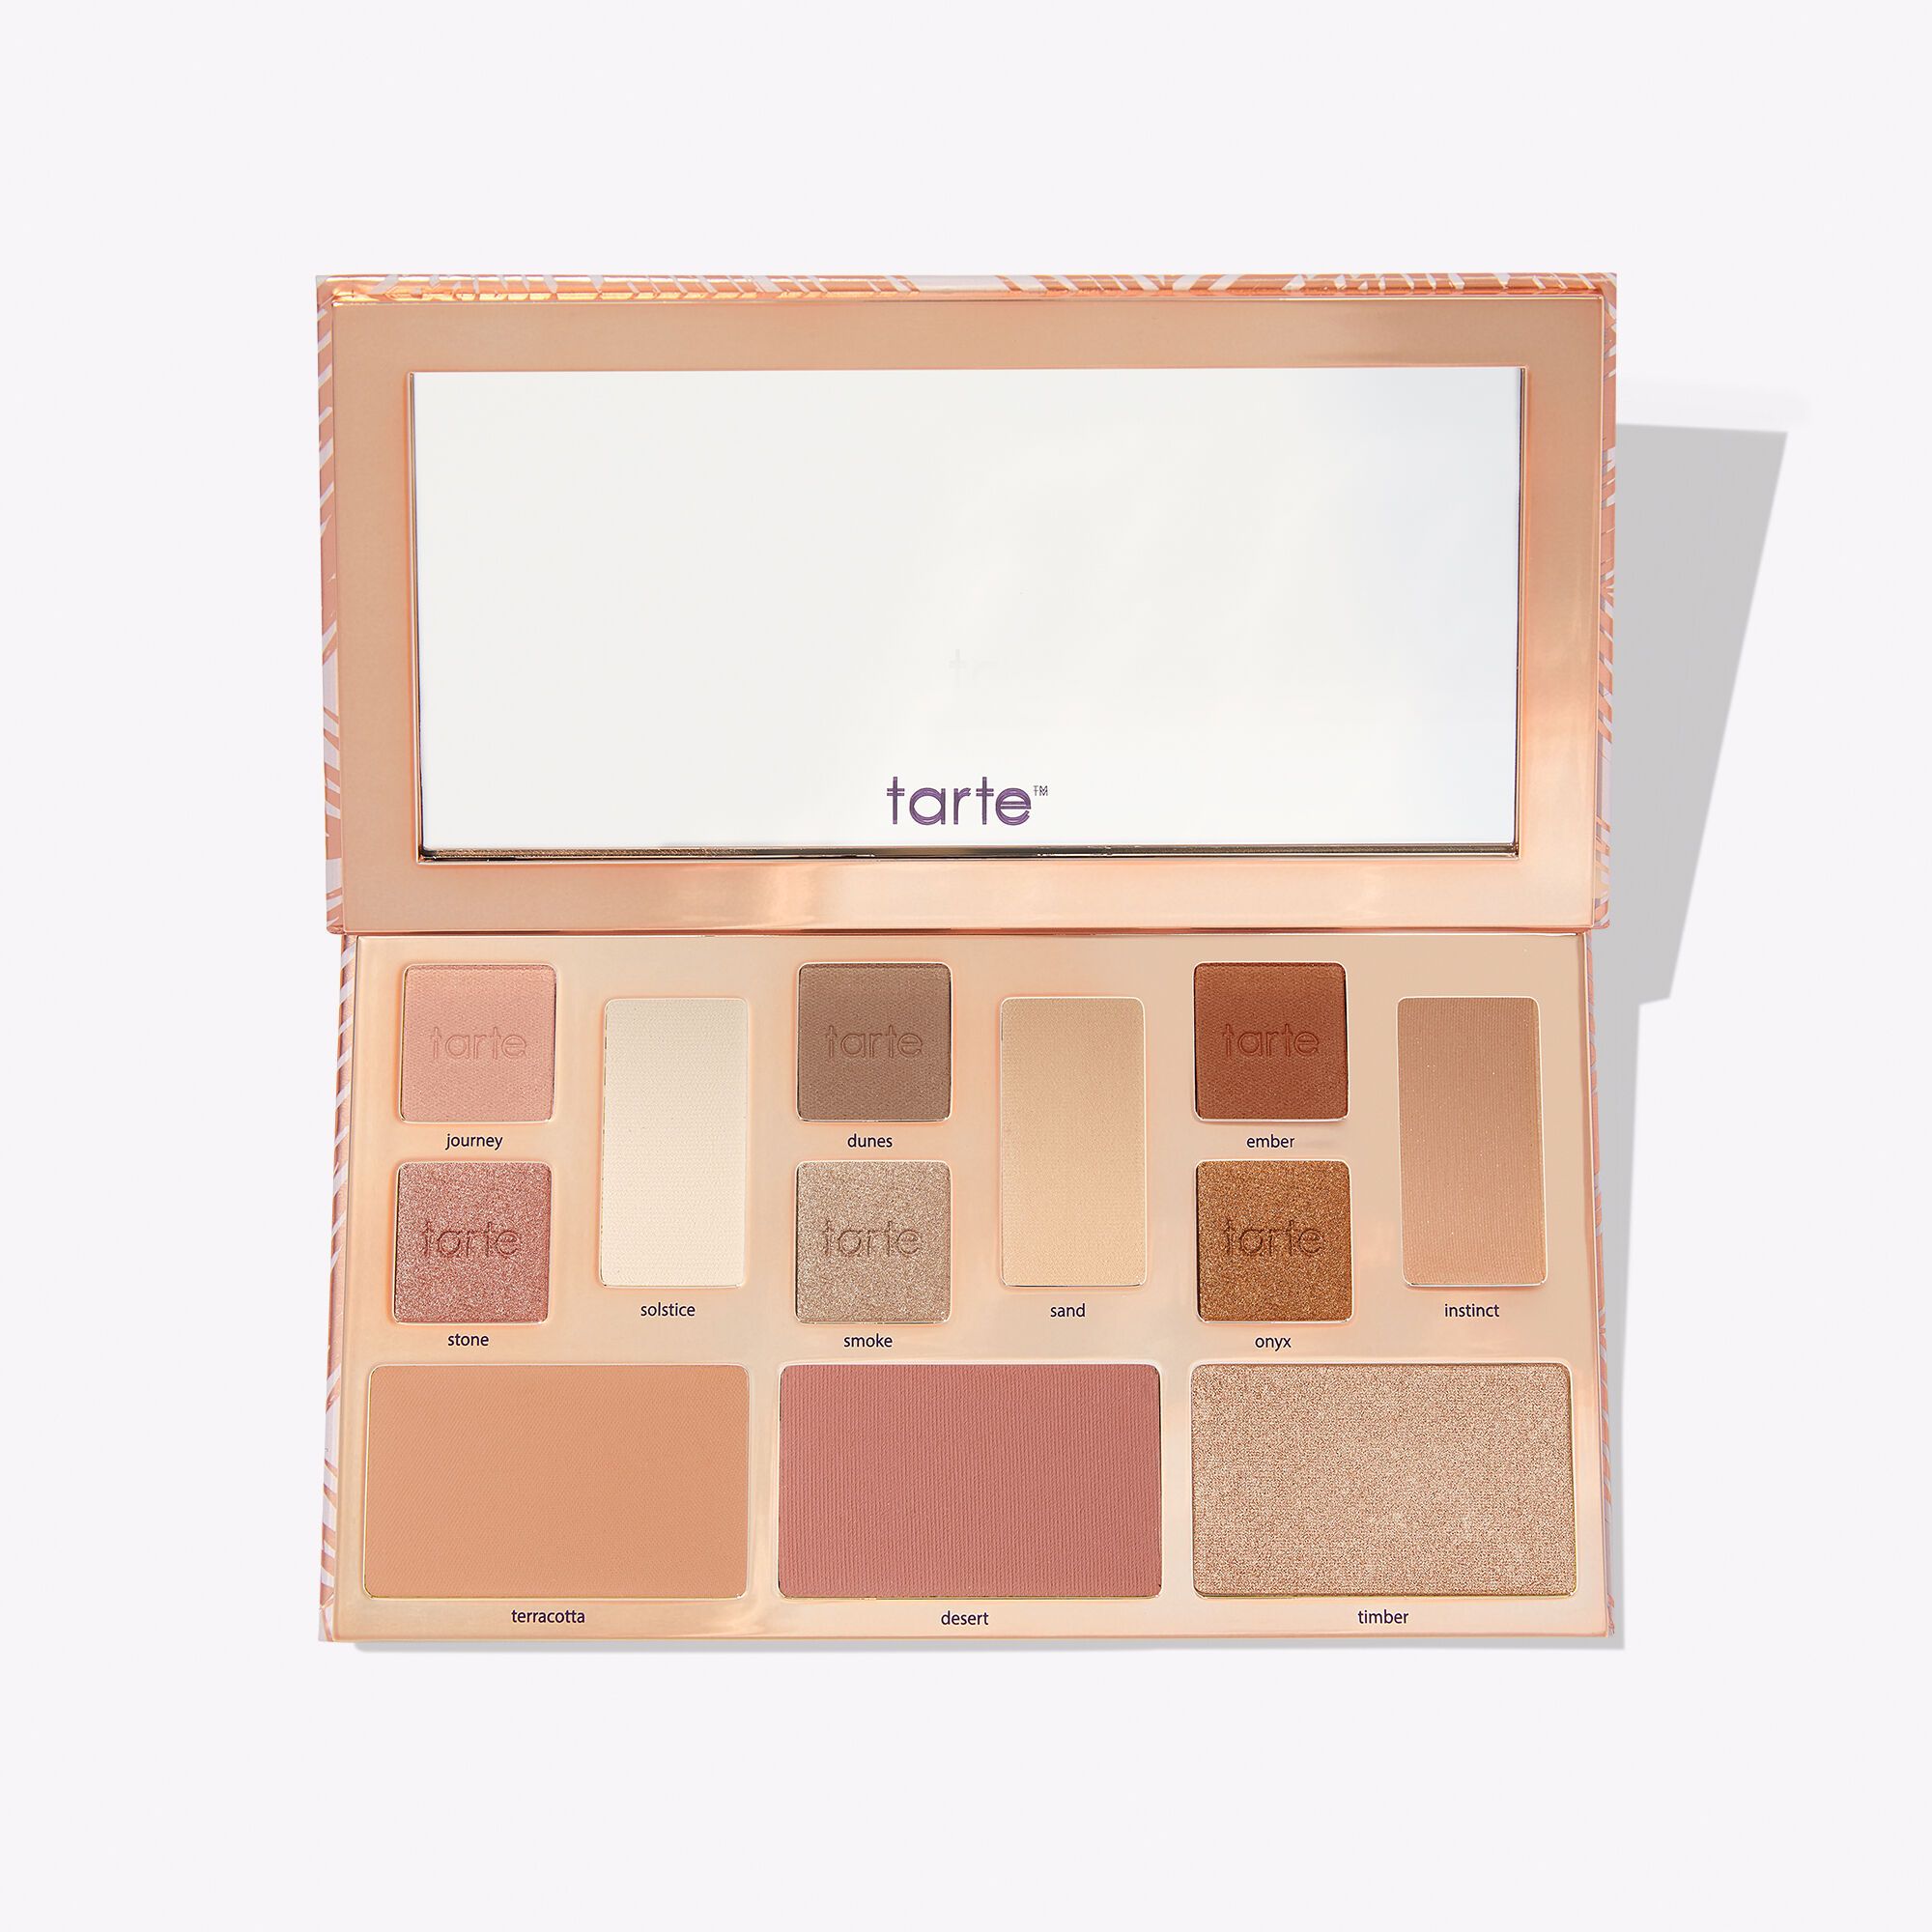 40% off sitewide + free ship* | tarte cosmetics (US)